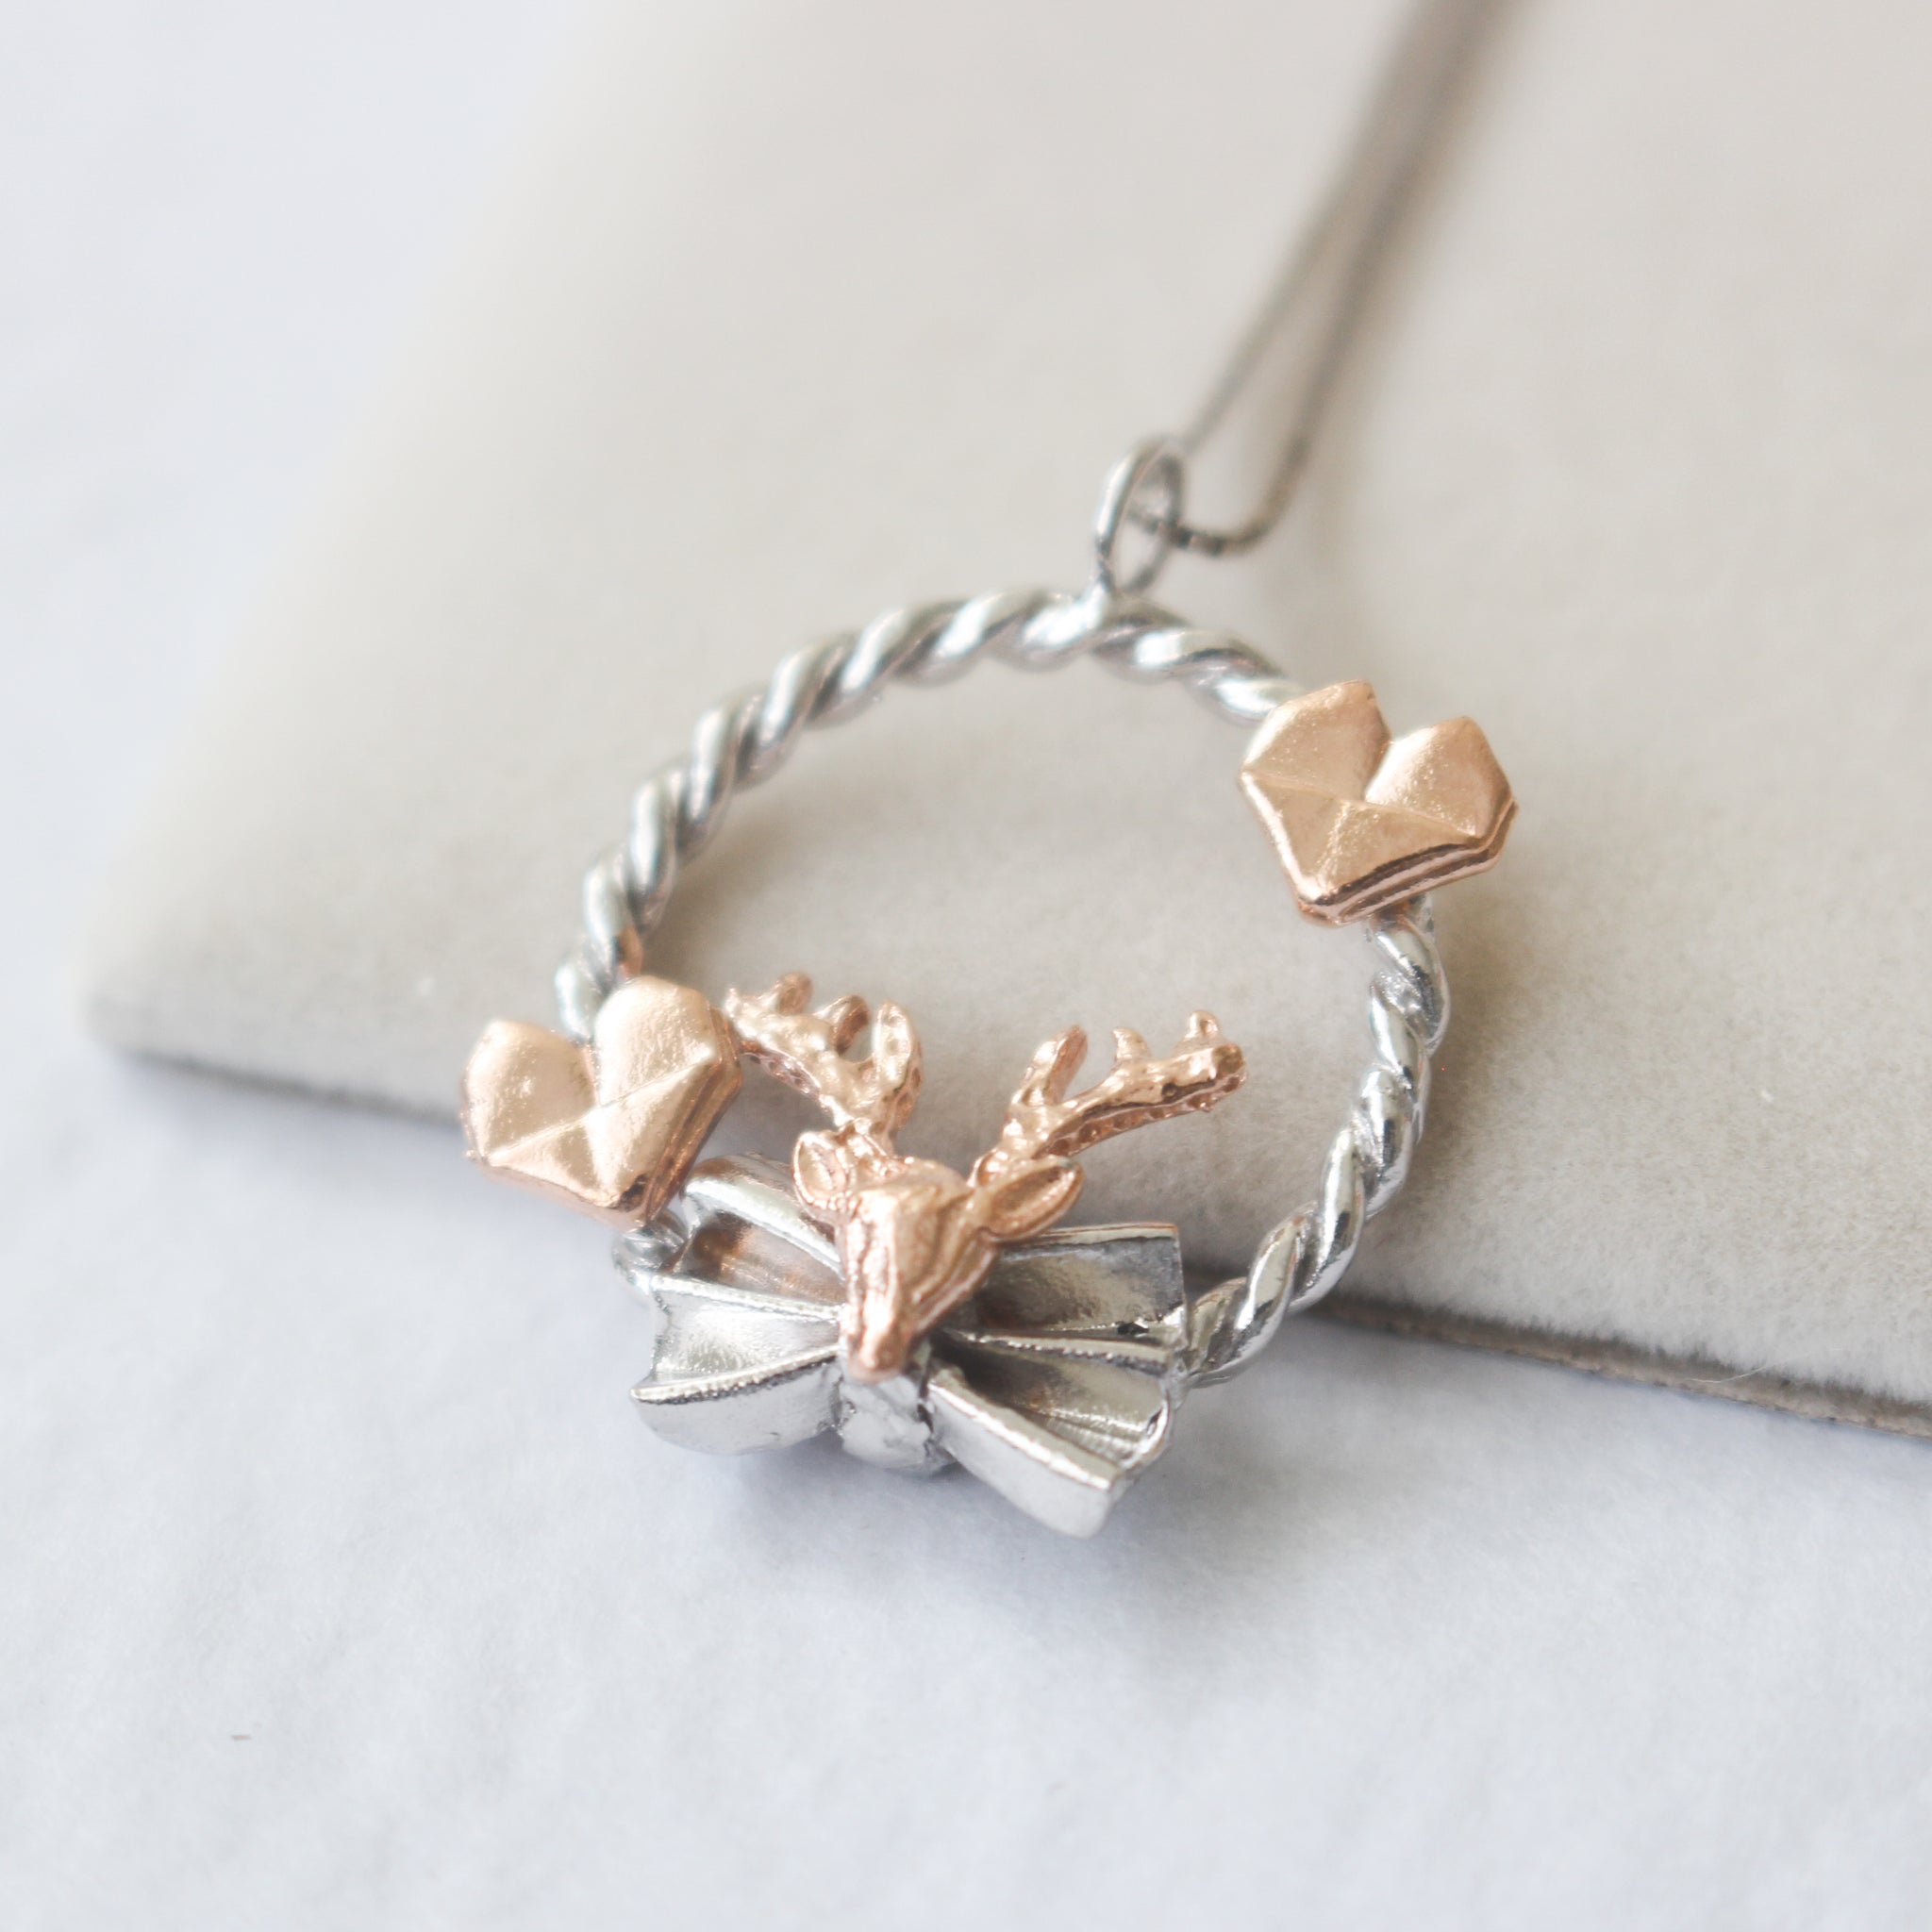 925 Silver Origami Reindeer Love Necklace